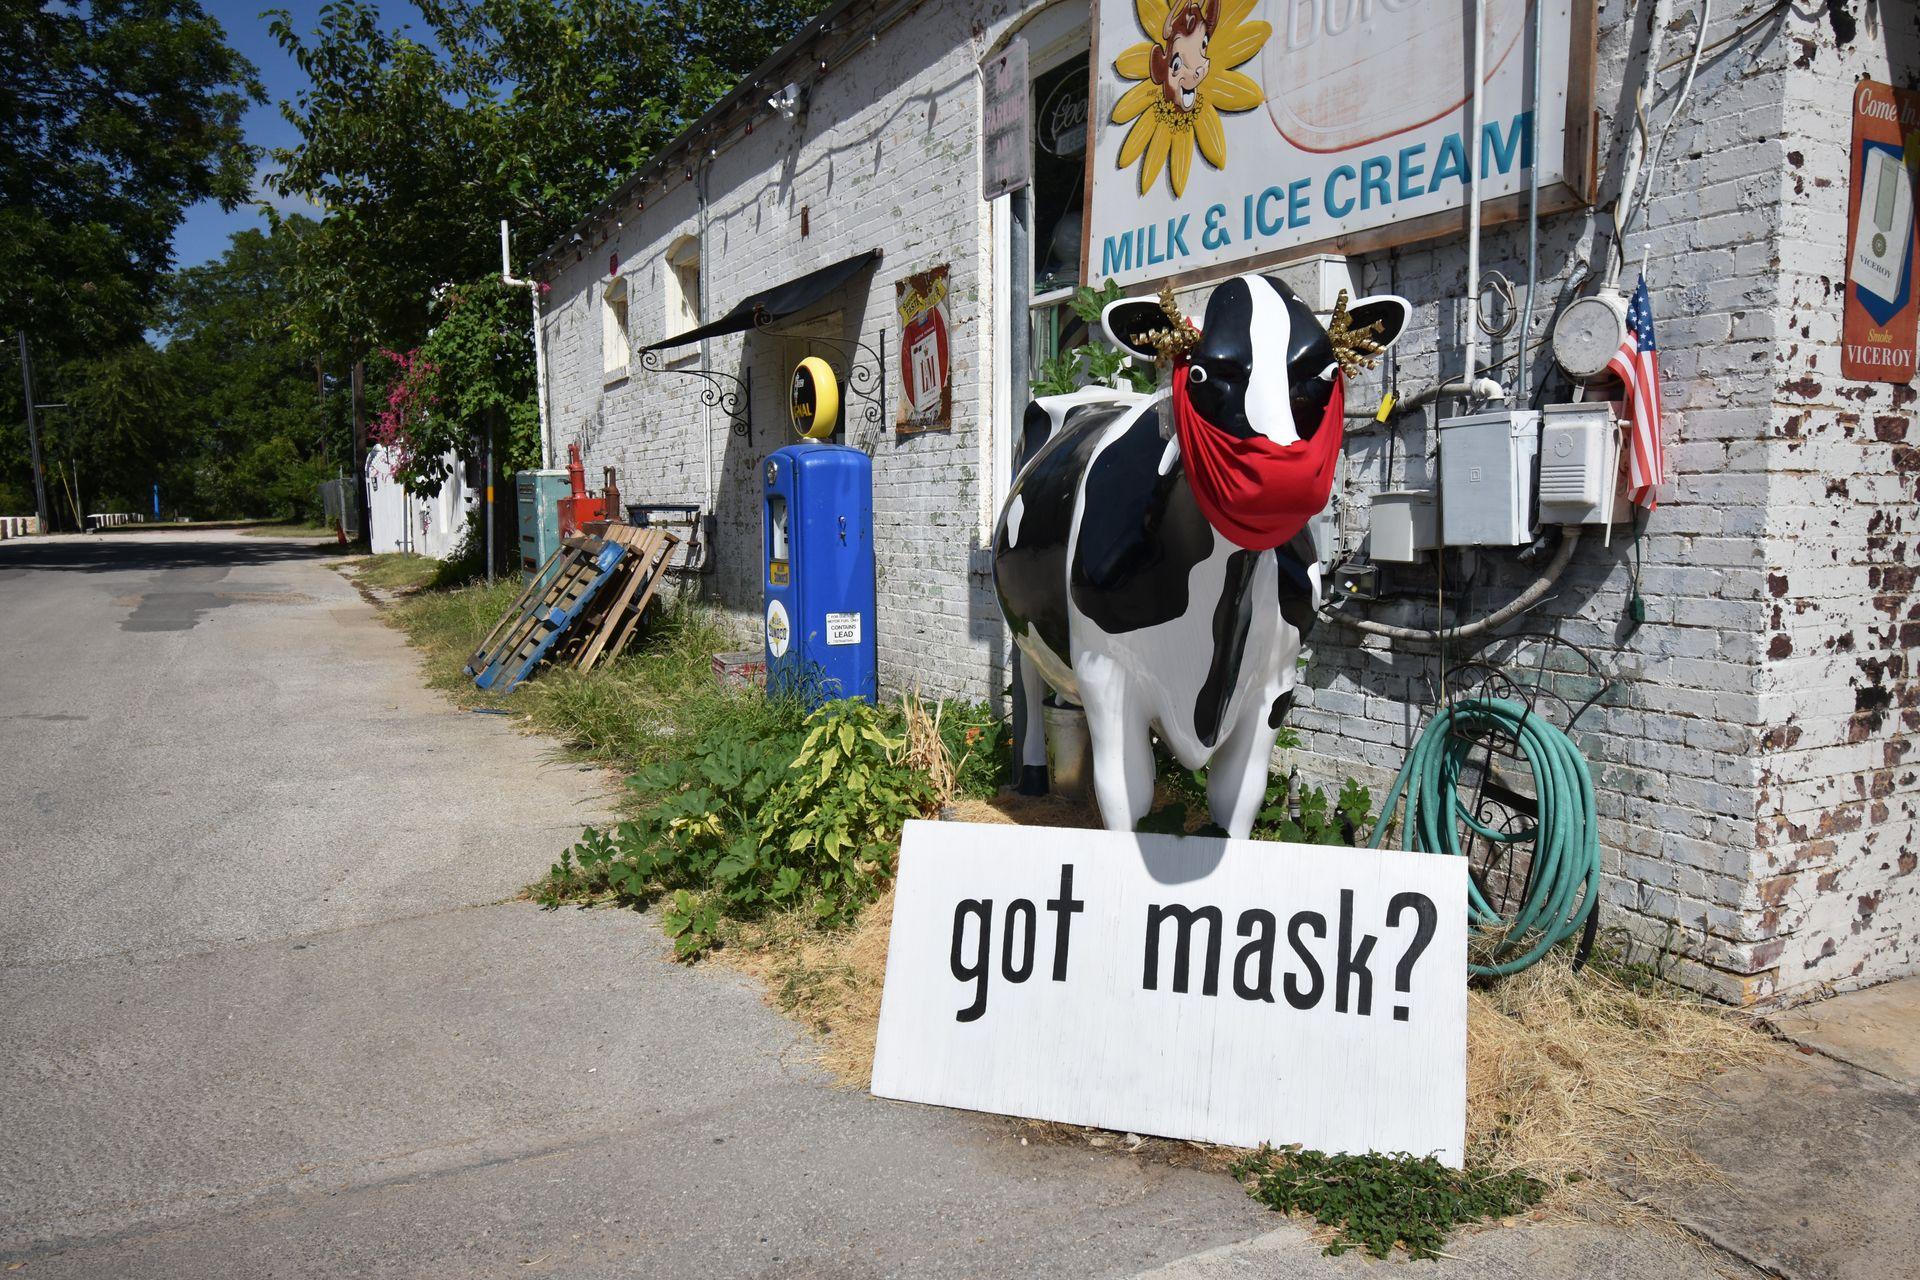 A cow statue with a red mask and a sign that reds "got mask?" There are other ecletic goods sitting outside of Flashback Funtiques.